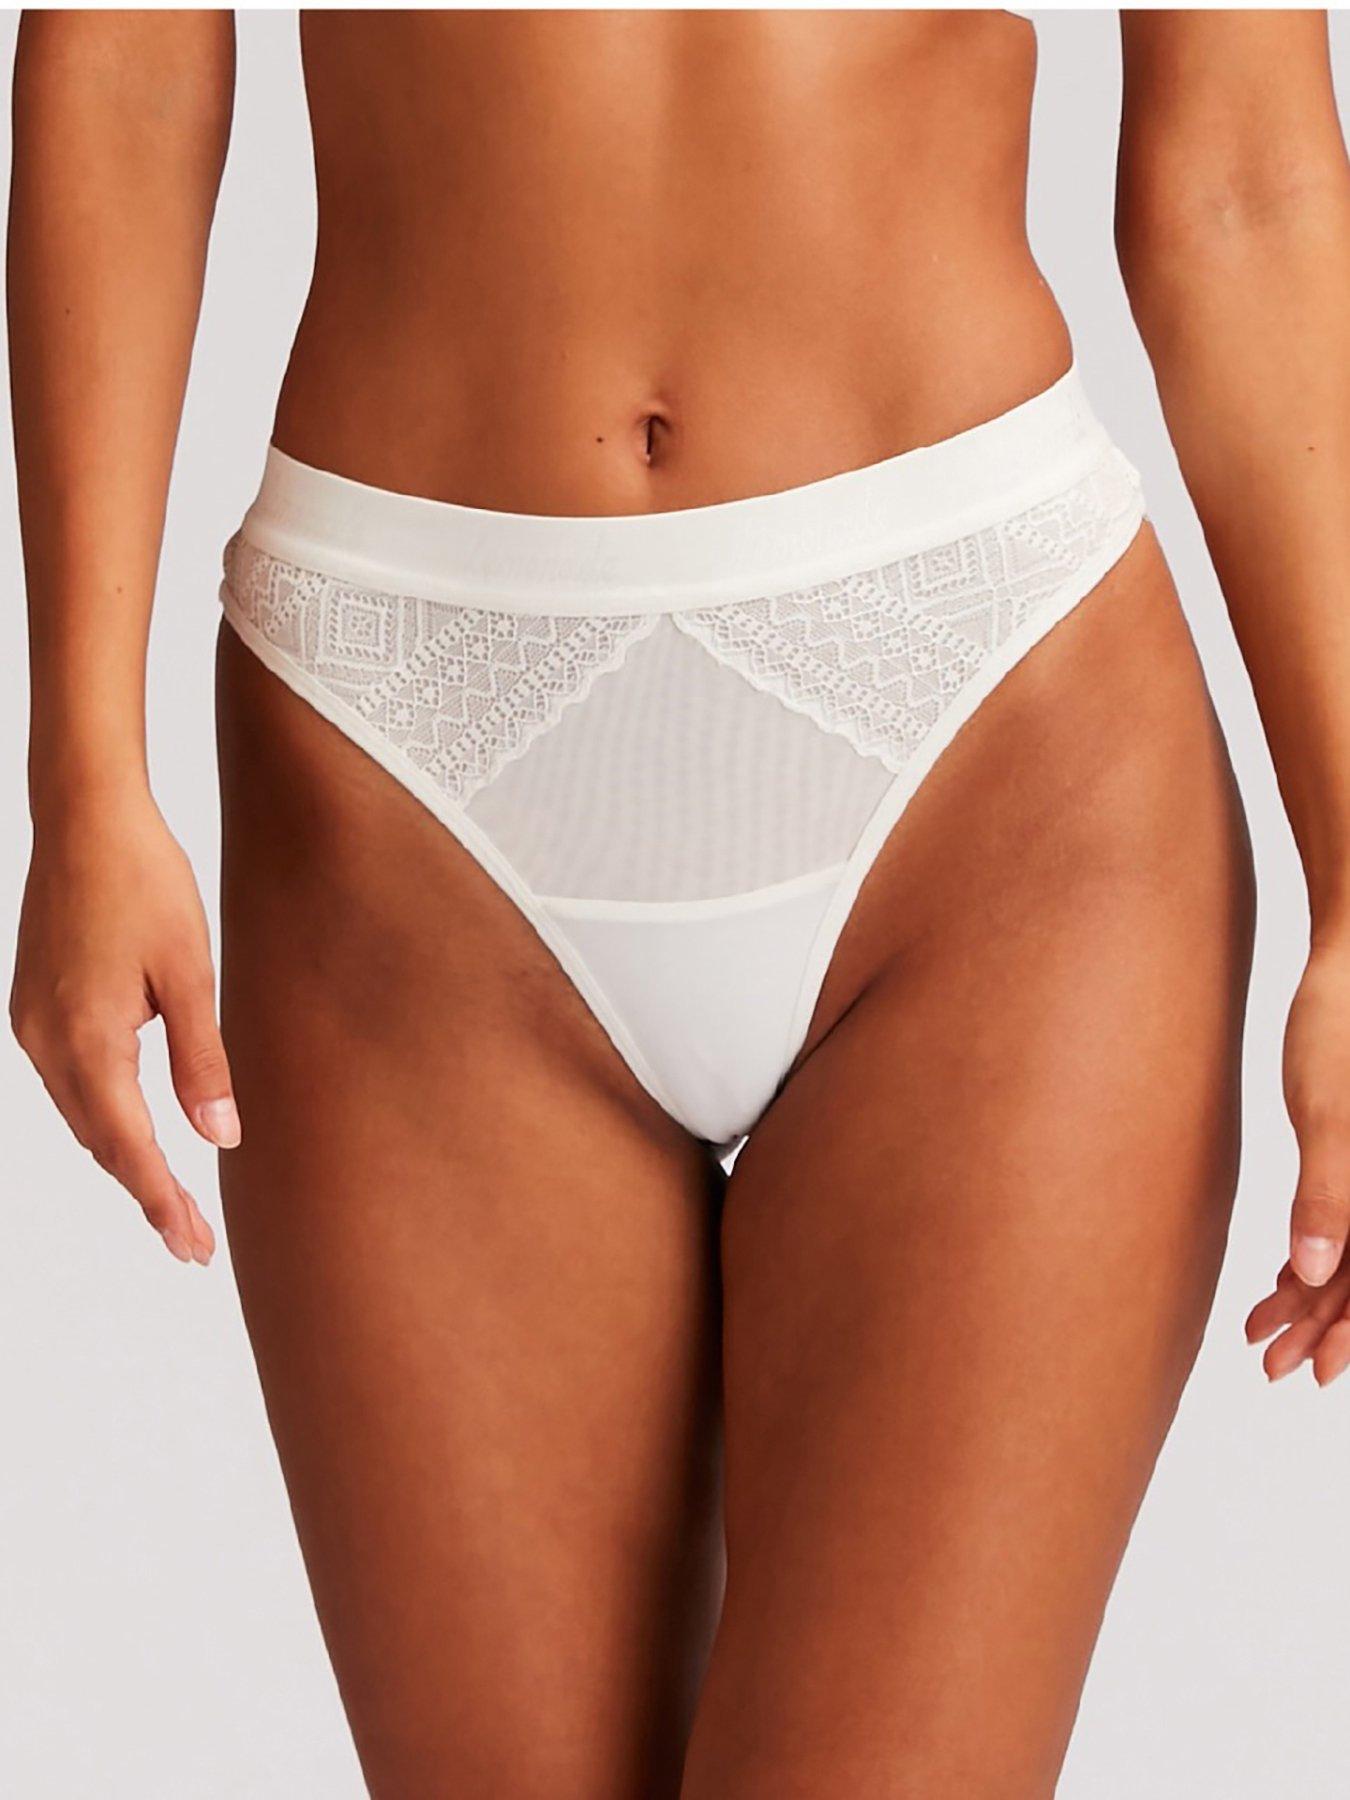 Extra High-Waisted Sheer Bottom Shaper Panty at Belle Lacet Lingerie